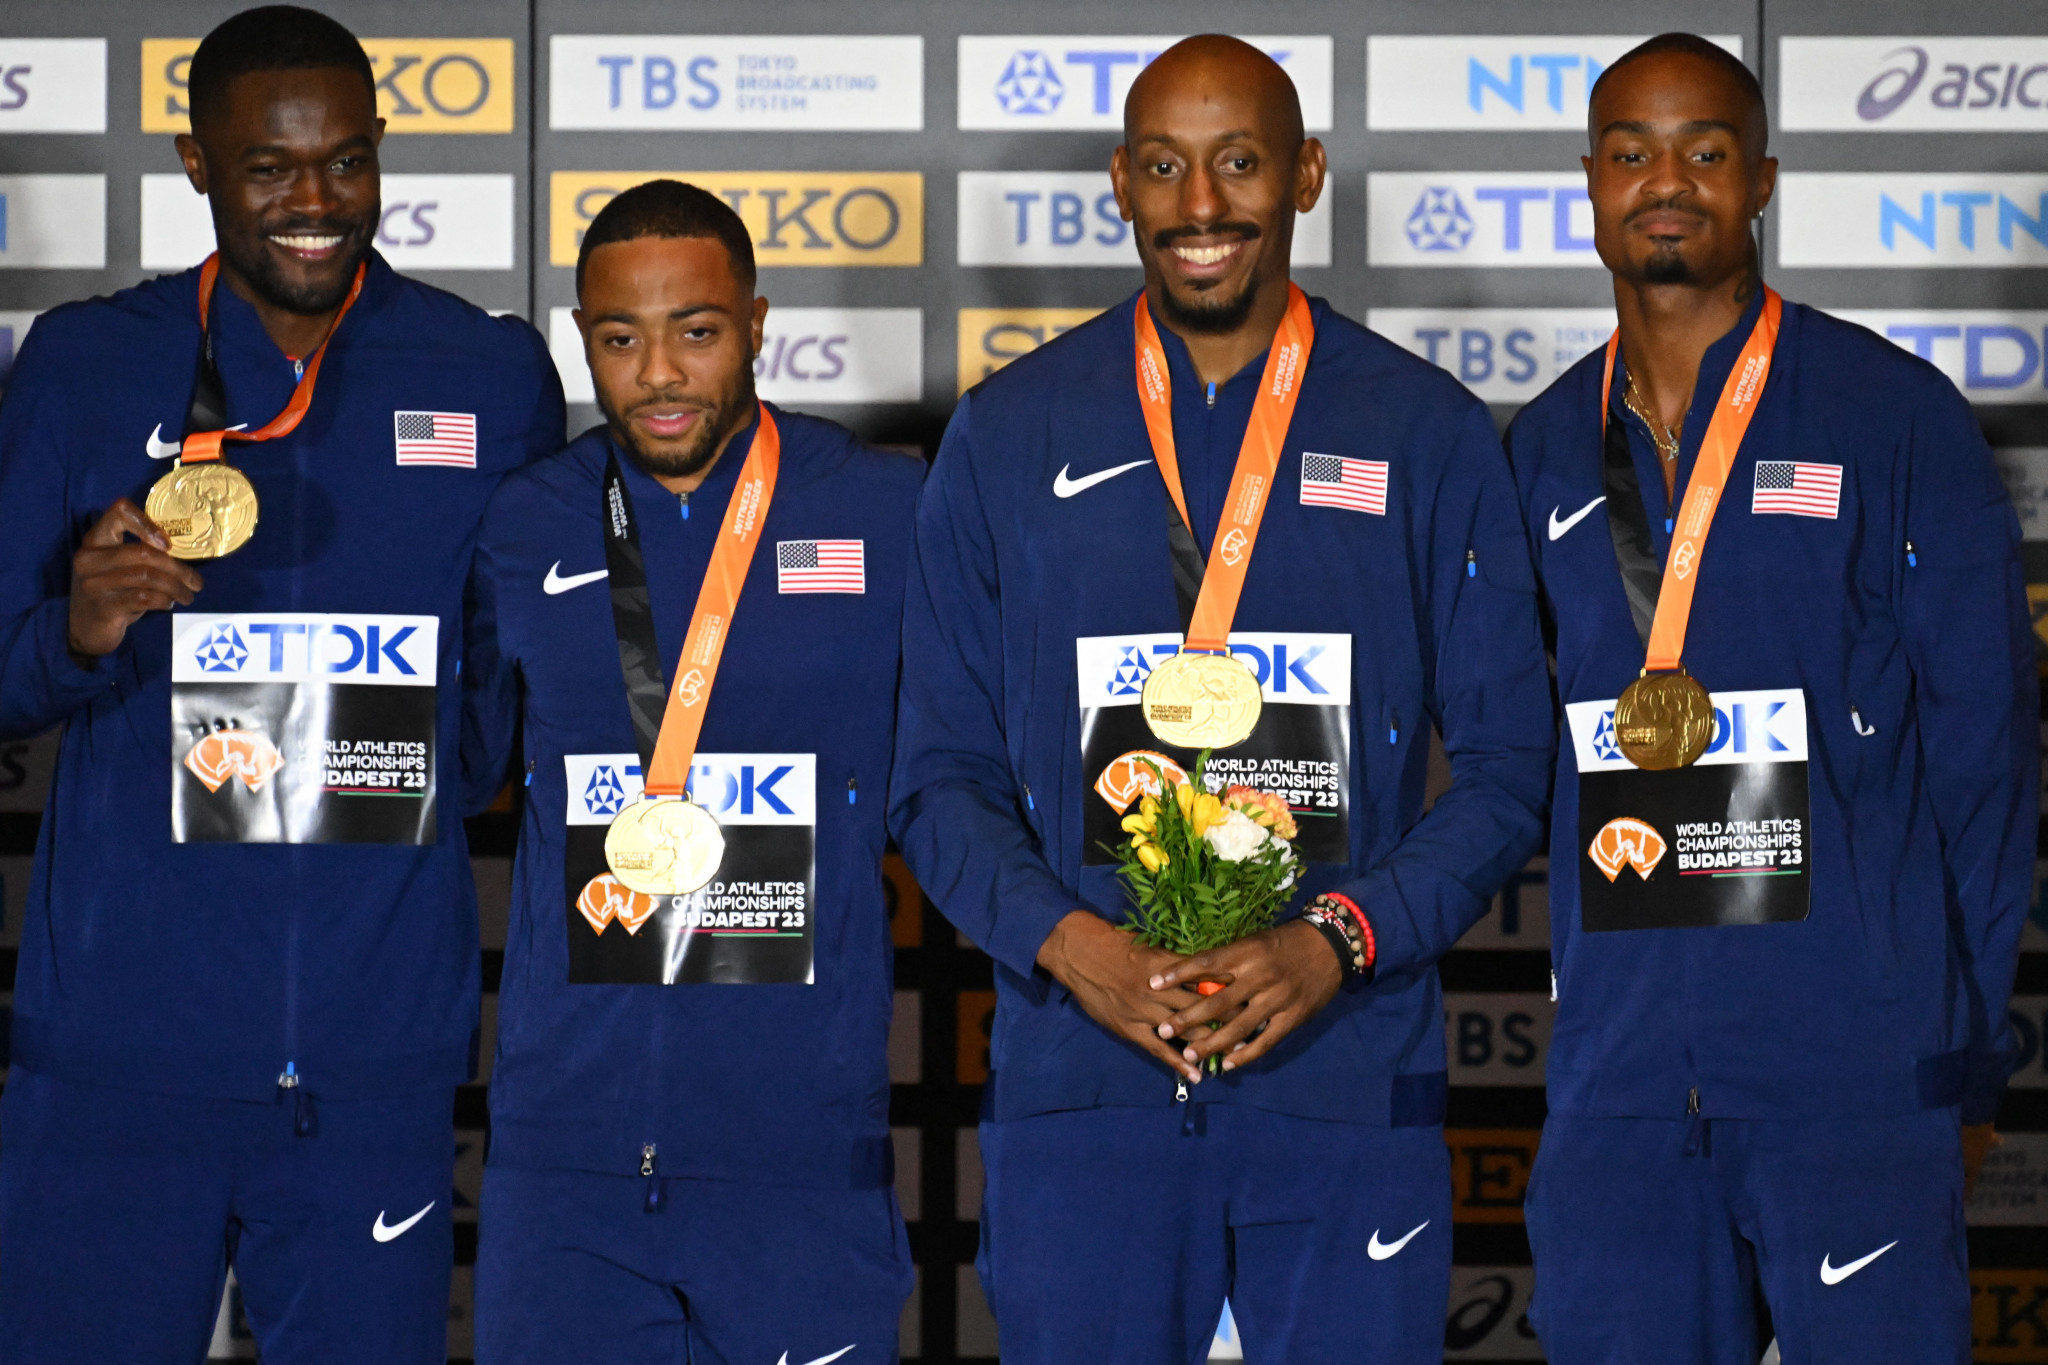 The United States finished the World Athletics Championships top of the medals table with 12 golds after their men's 4x400m relay triumph ©Getty Images